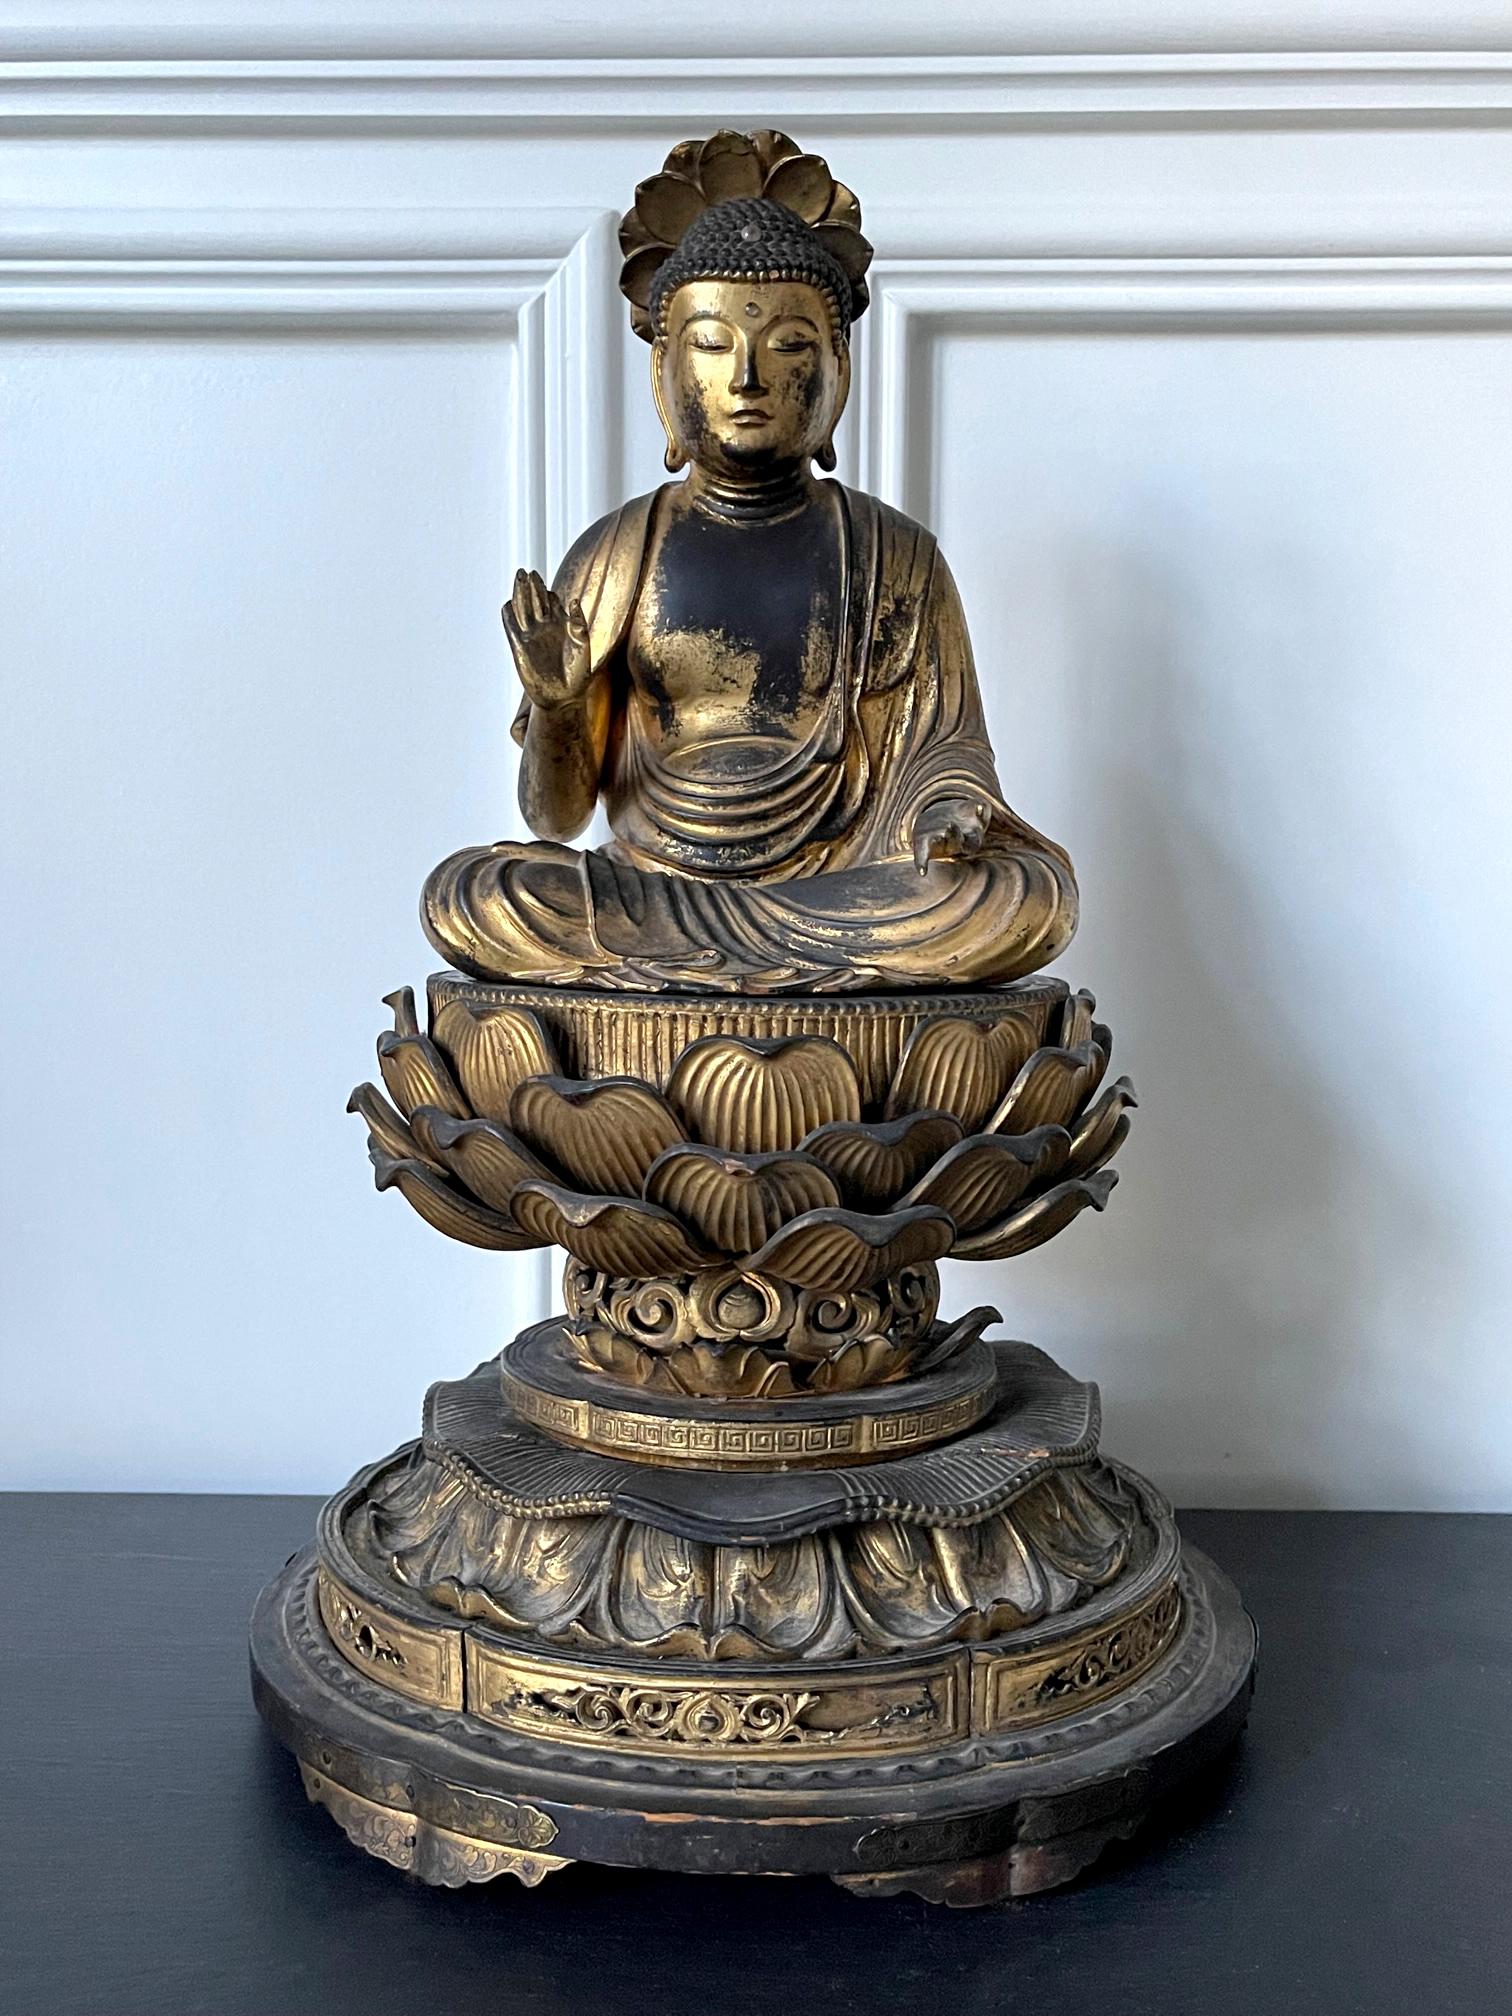 A Japanese carved wood Amitabha (Amida) Buddha statue with residual gold leafed surface circa 19th century (late Edo period). The buddha is seated in the padmasana position on an elevated double lotus throne, under a small lotus halo canopy. His